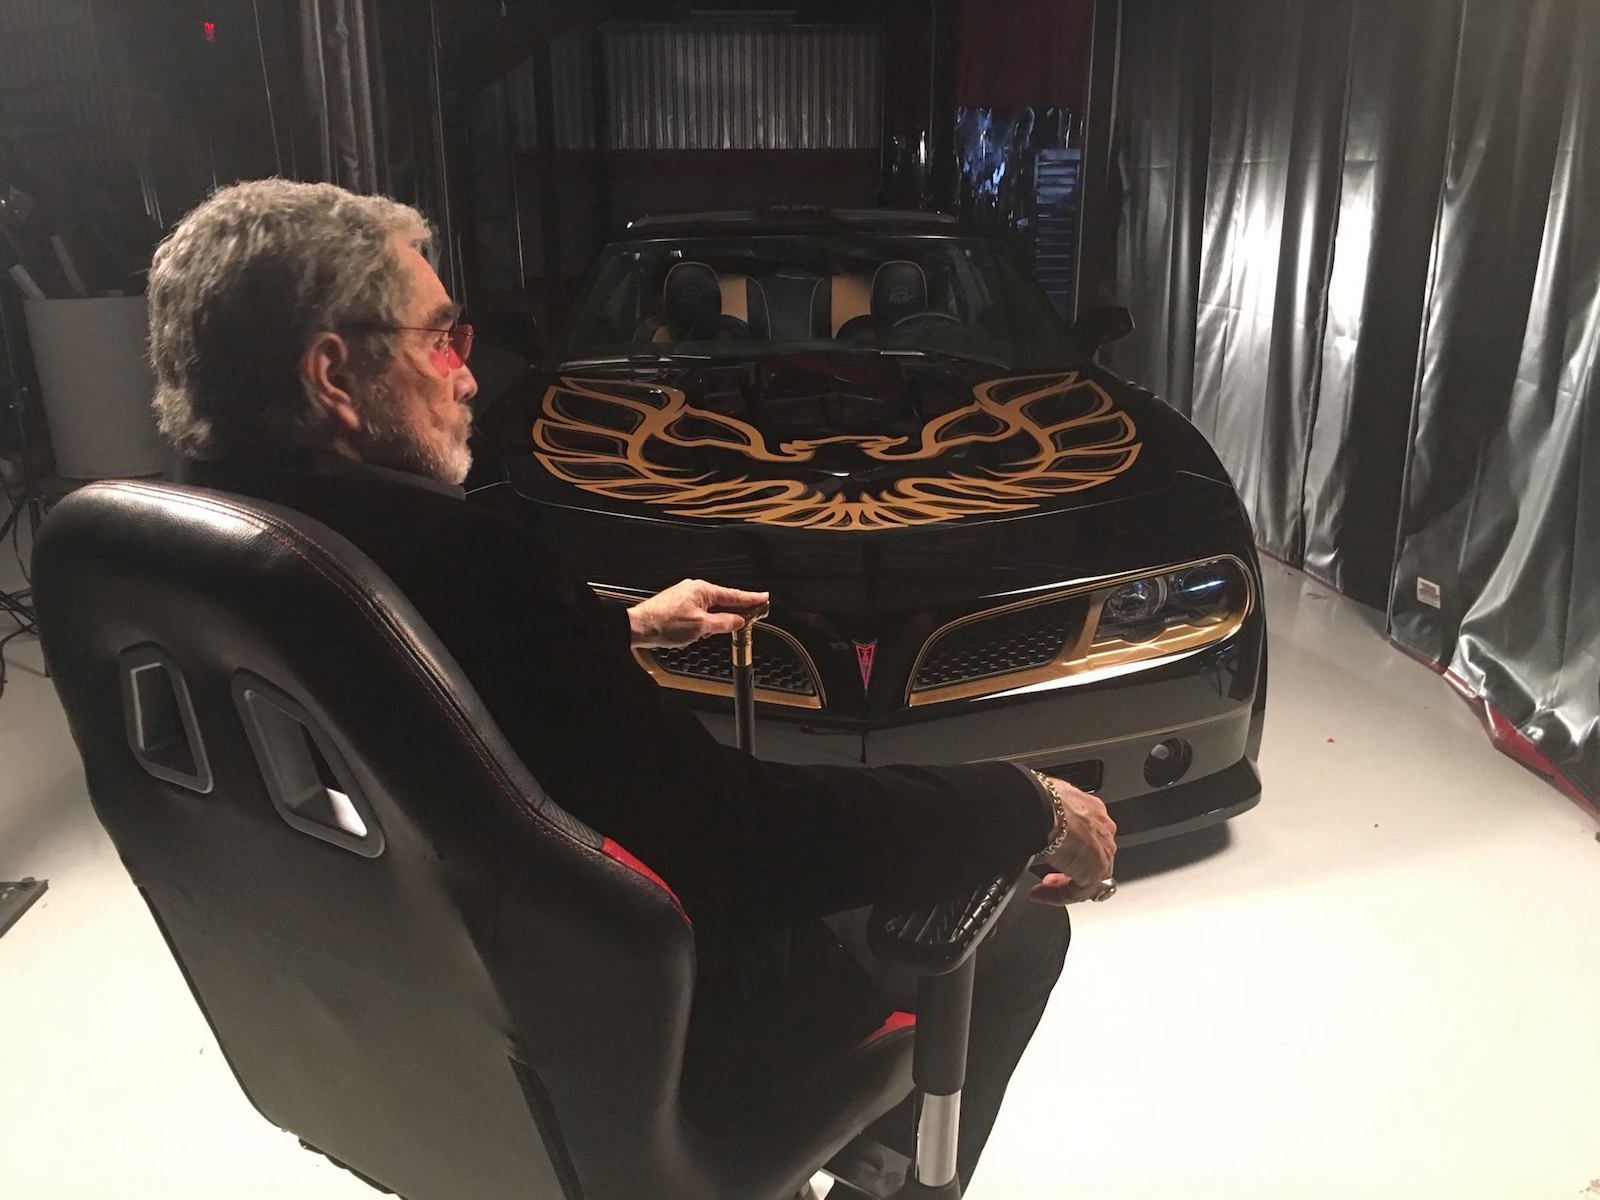 Check Out Trans Am Depot's Modern Take On The 1977 Smoky And The Bandit Muscle Car